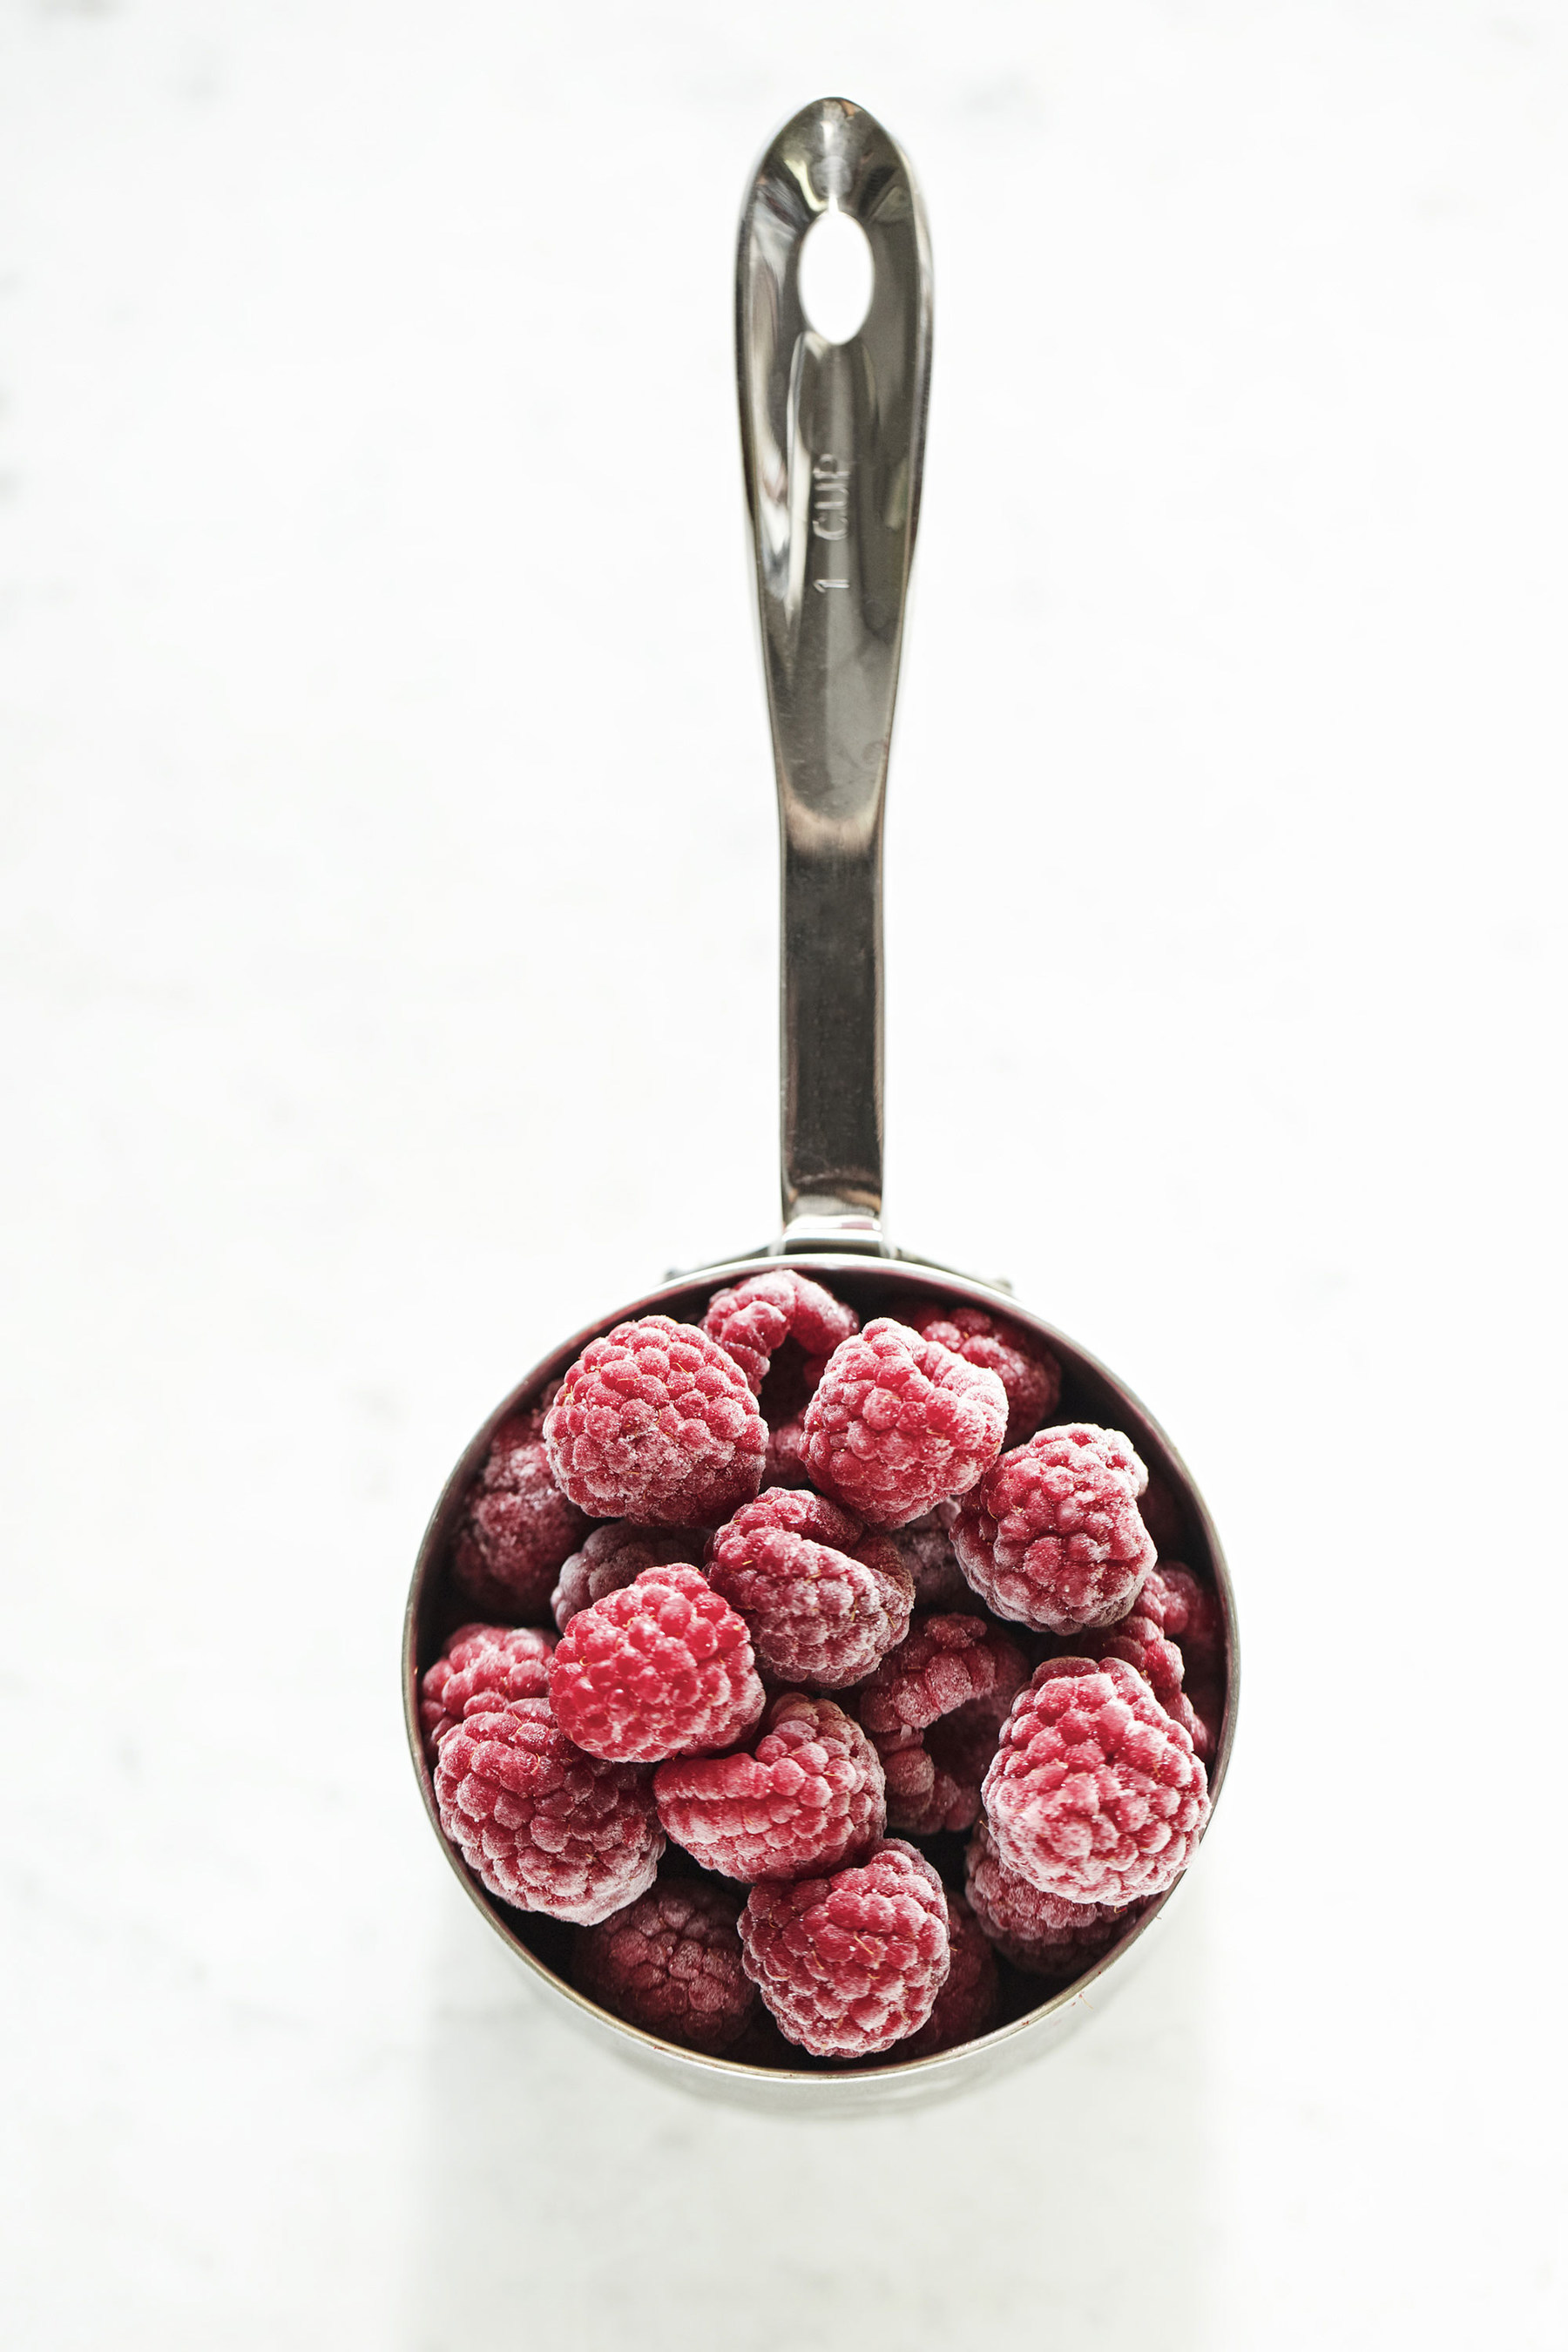 New Animal Research Explores Red Raspberries In Supporting Healthy Weight And Motor Function